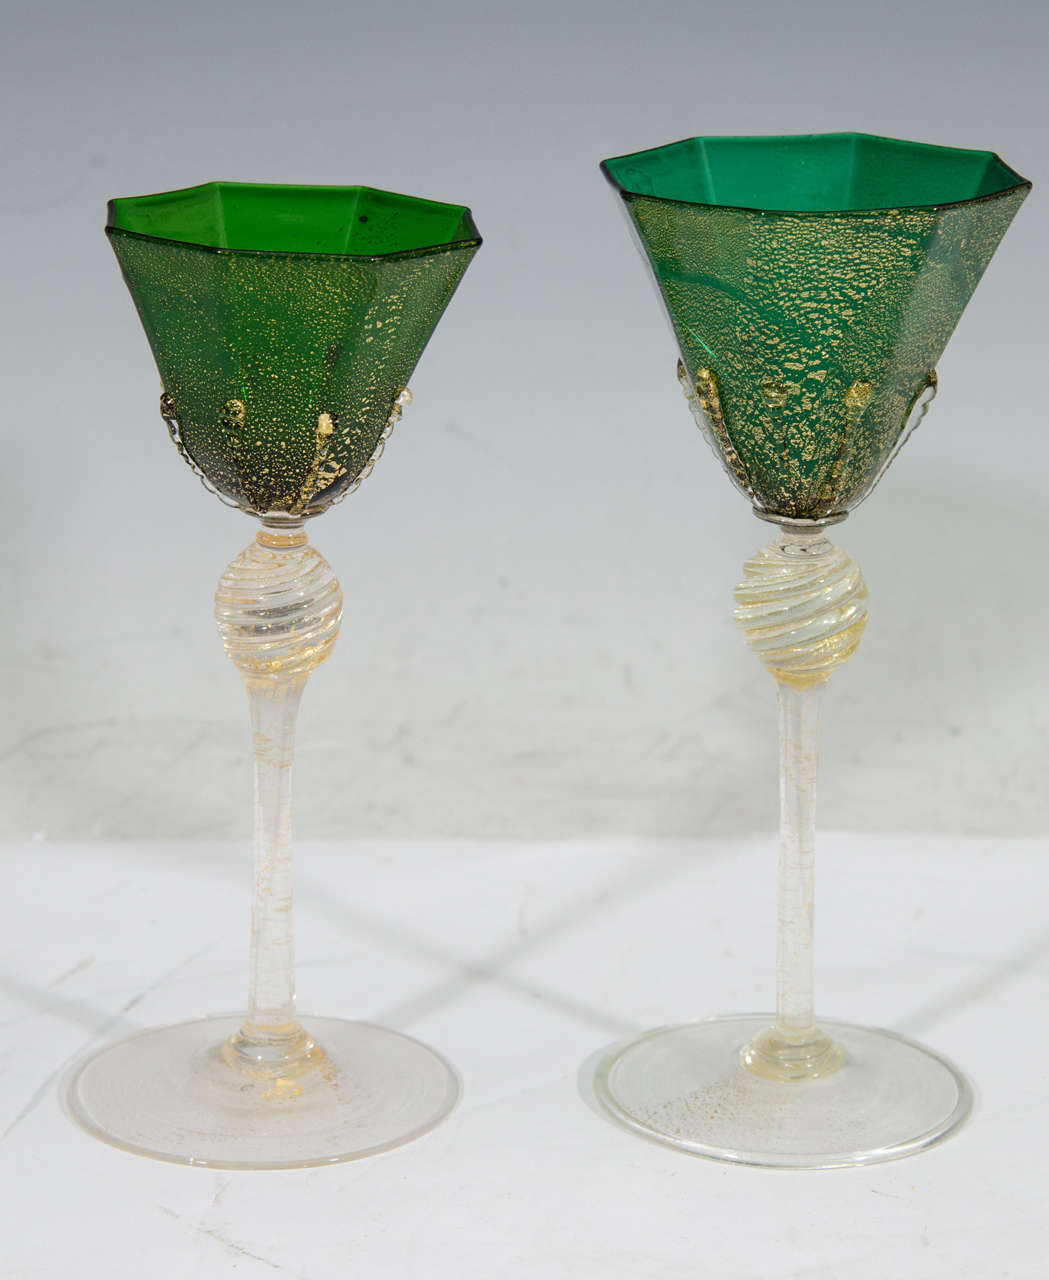 A vintage set of eight large and four smaller emerald-green with gold fleck Venetian glass stemware.

Large glasses: 7.75